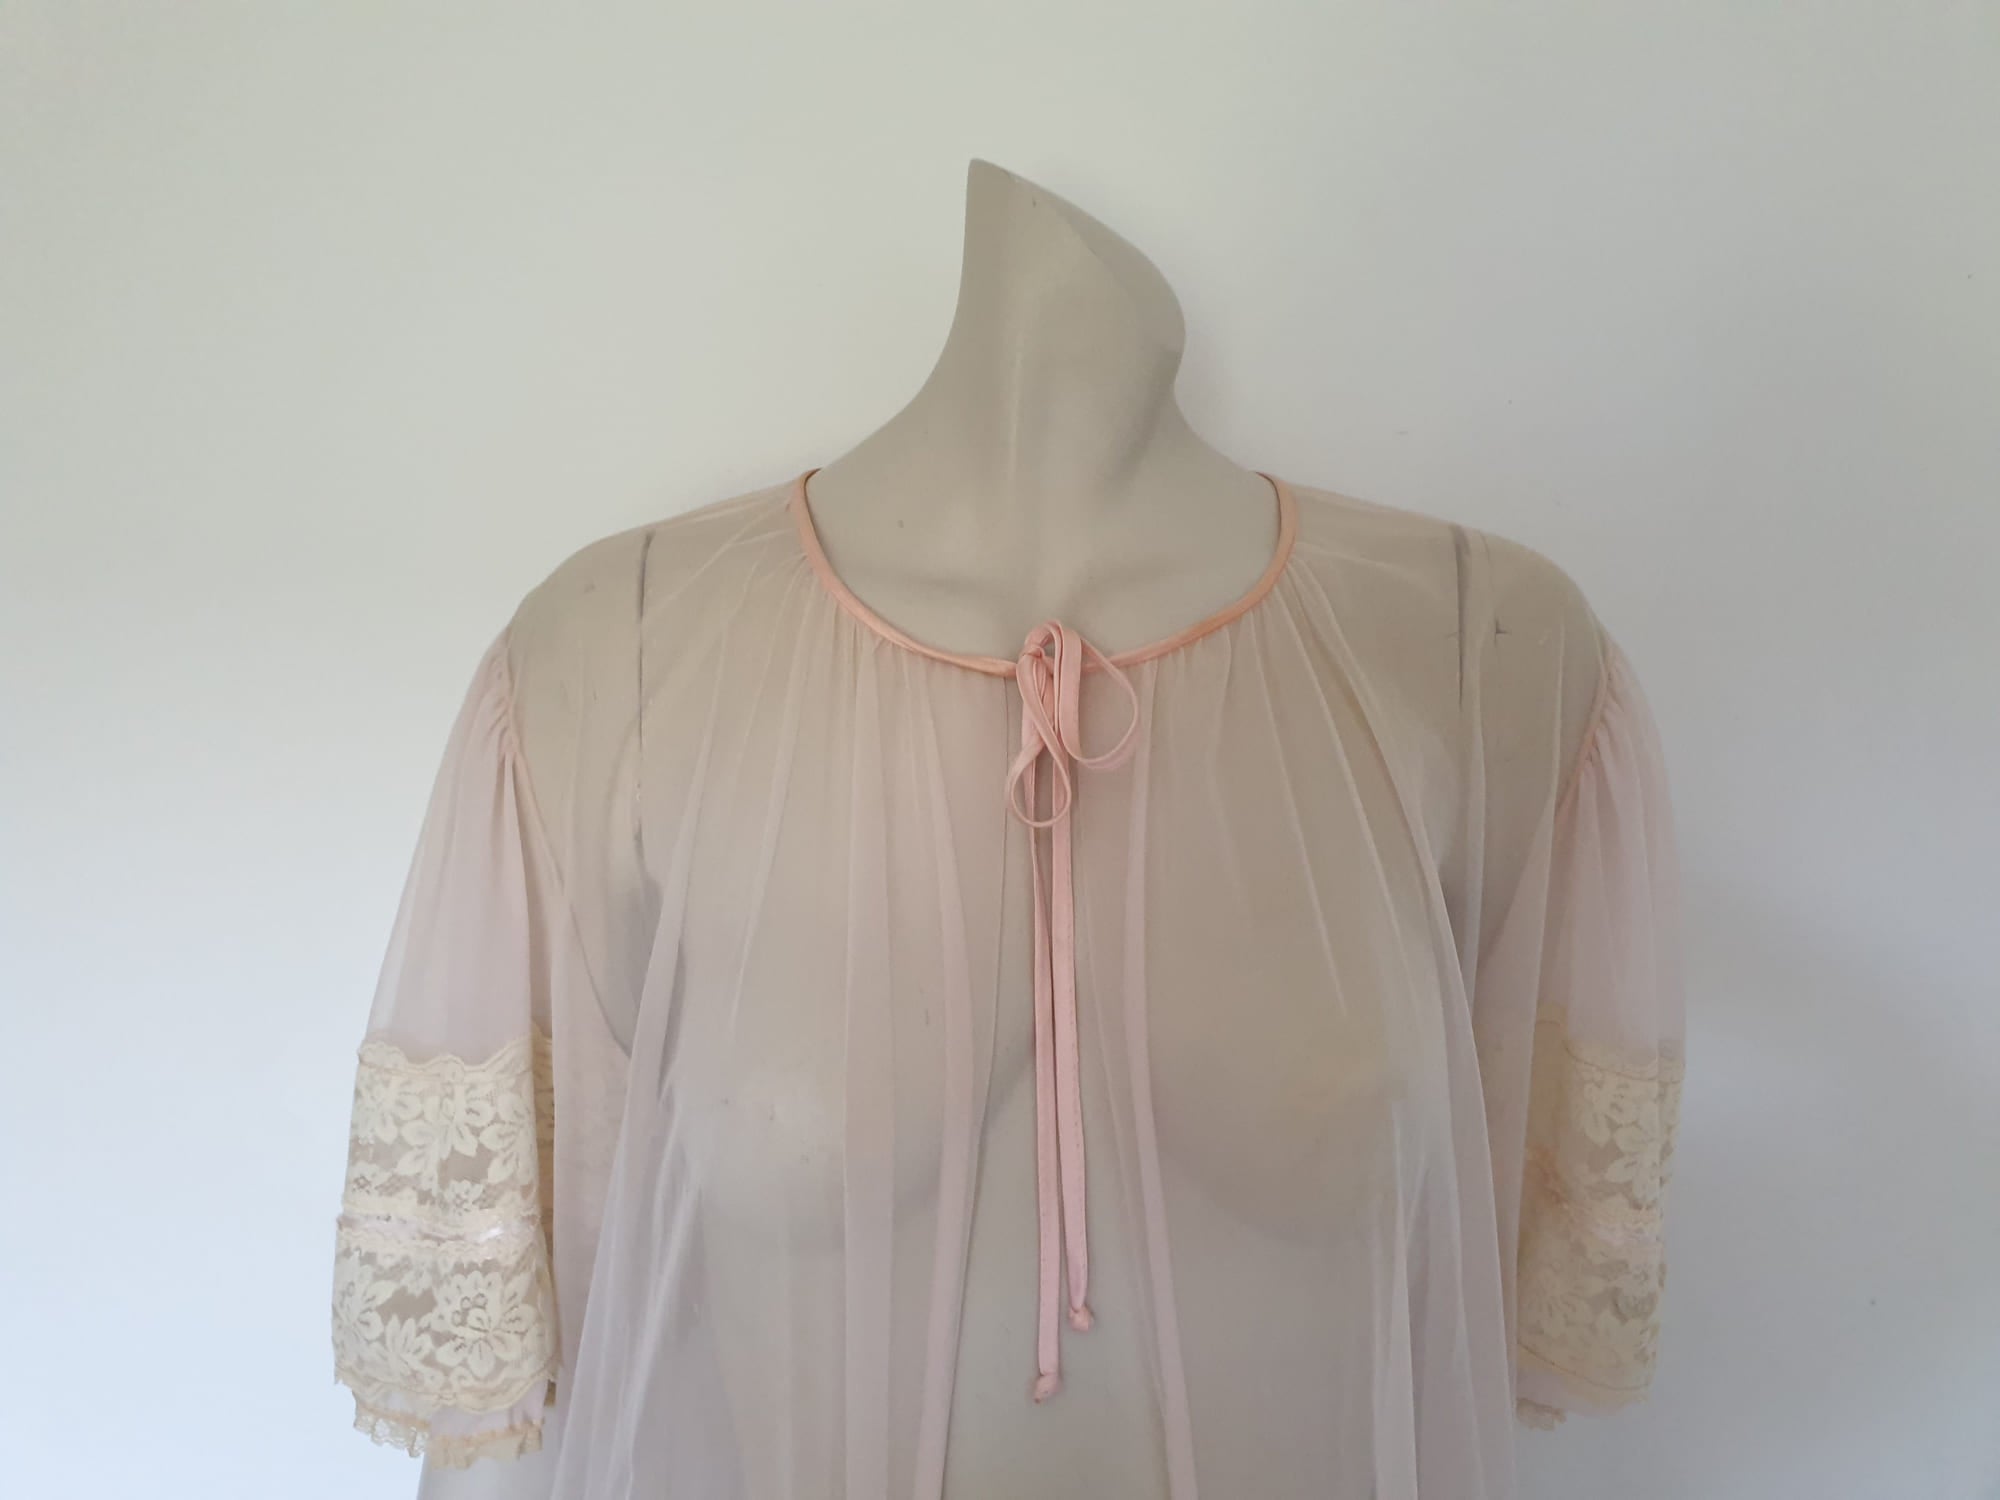 Vintage sheer peach robe or peignoir, long with puffy lace sleeves - Large